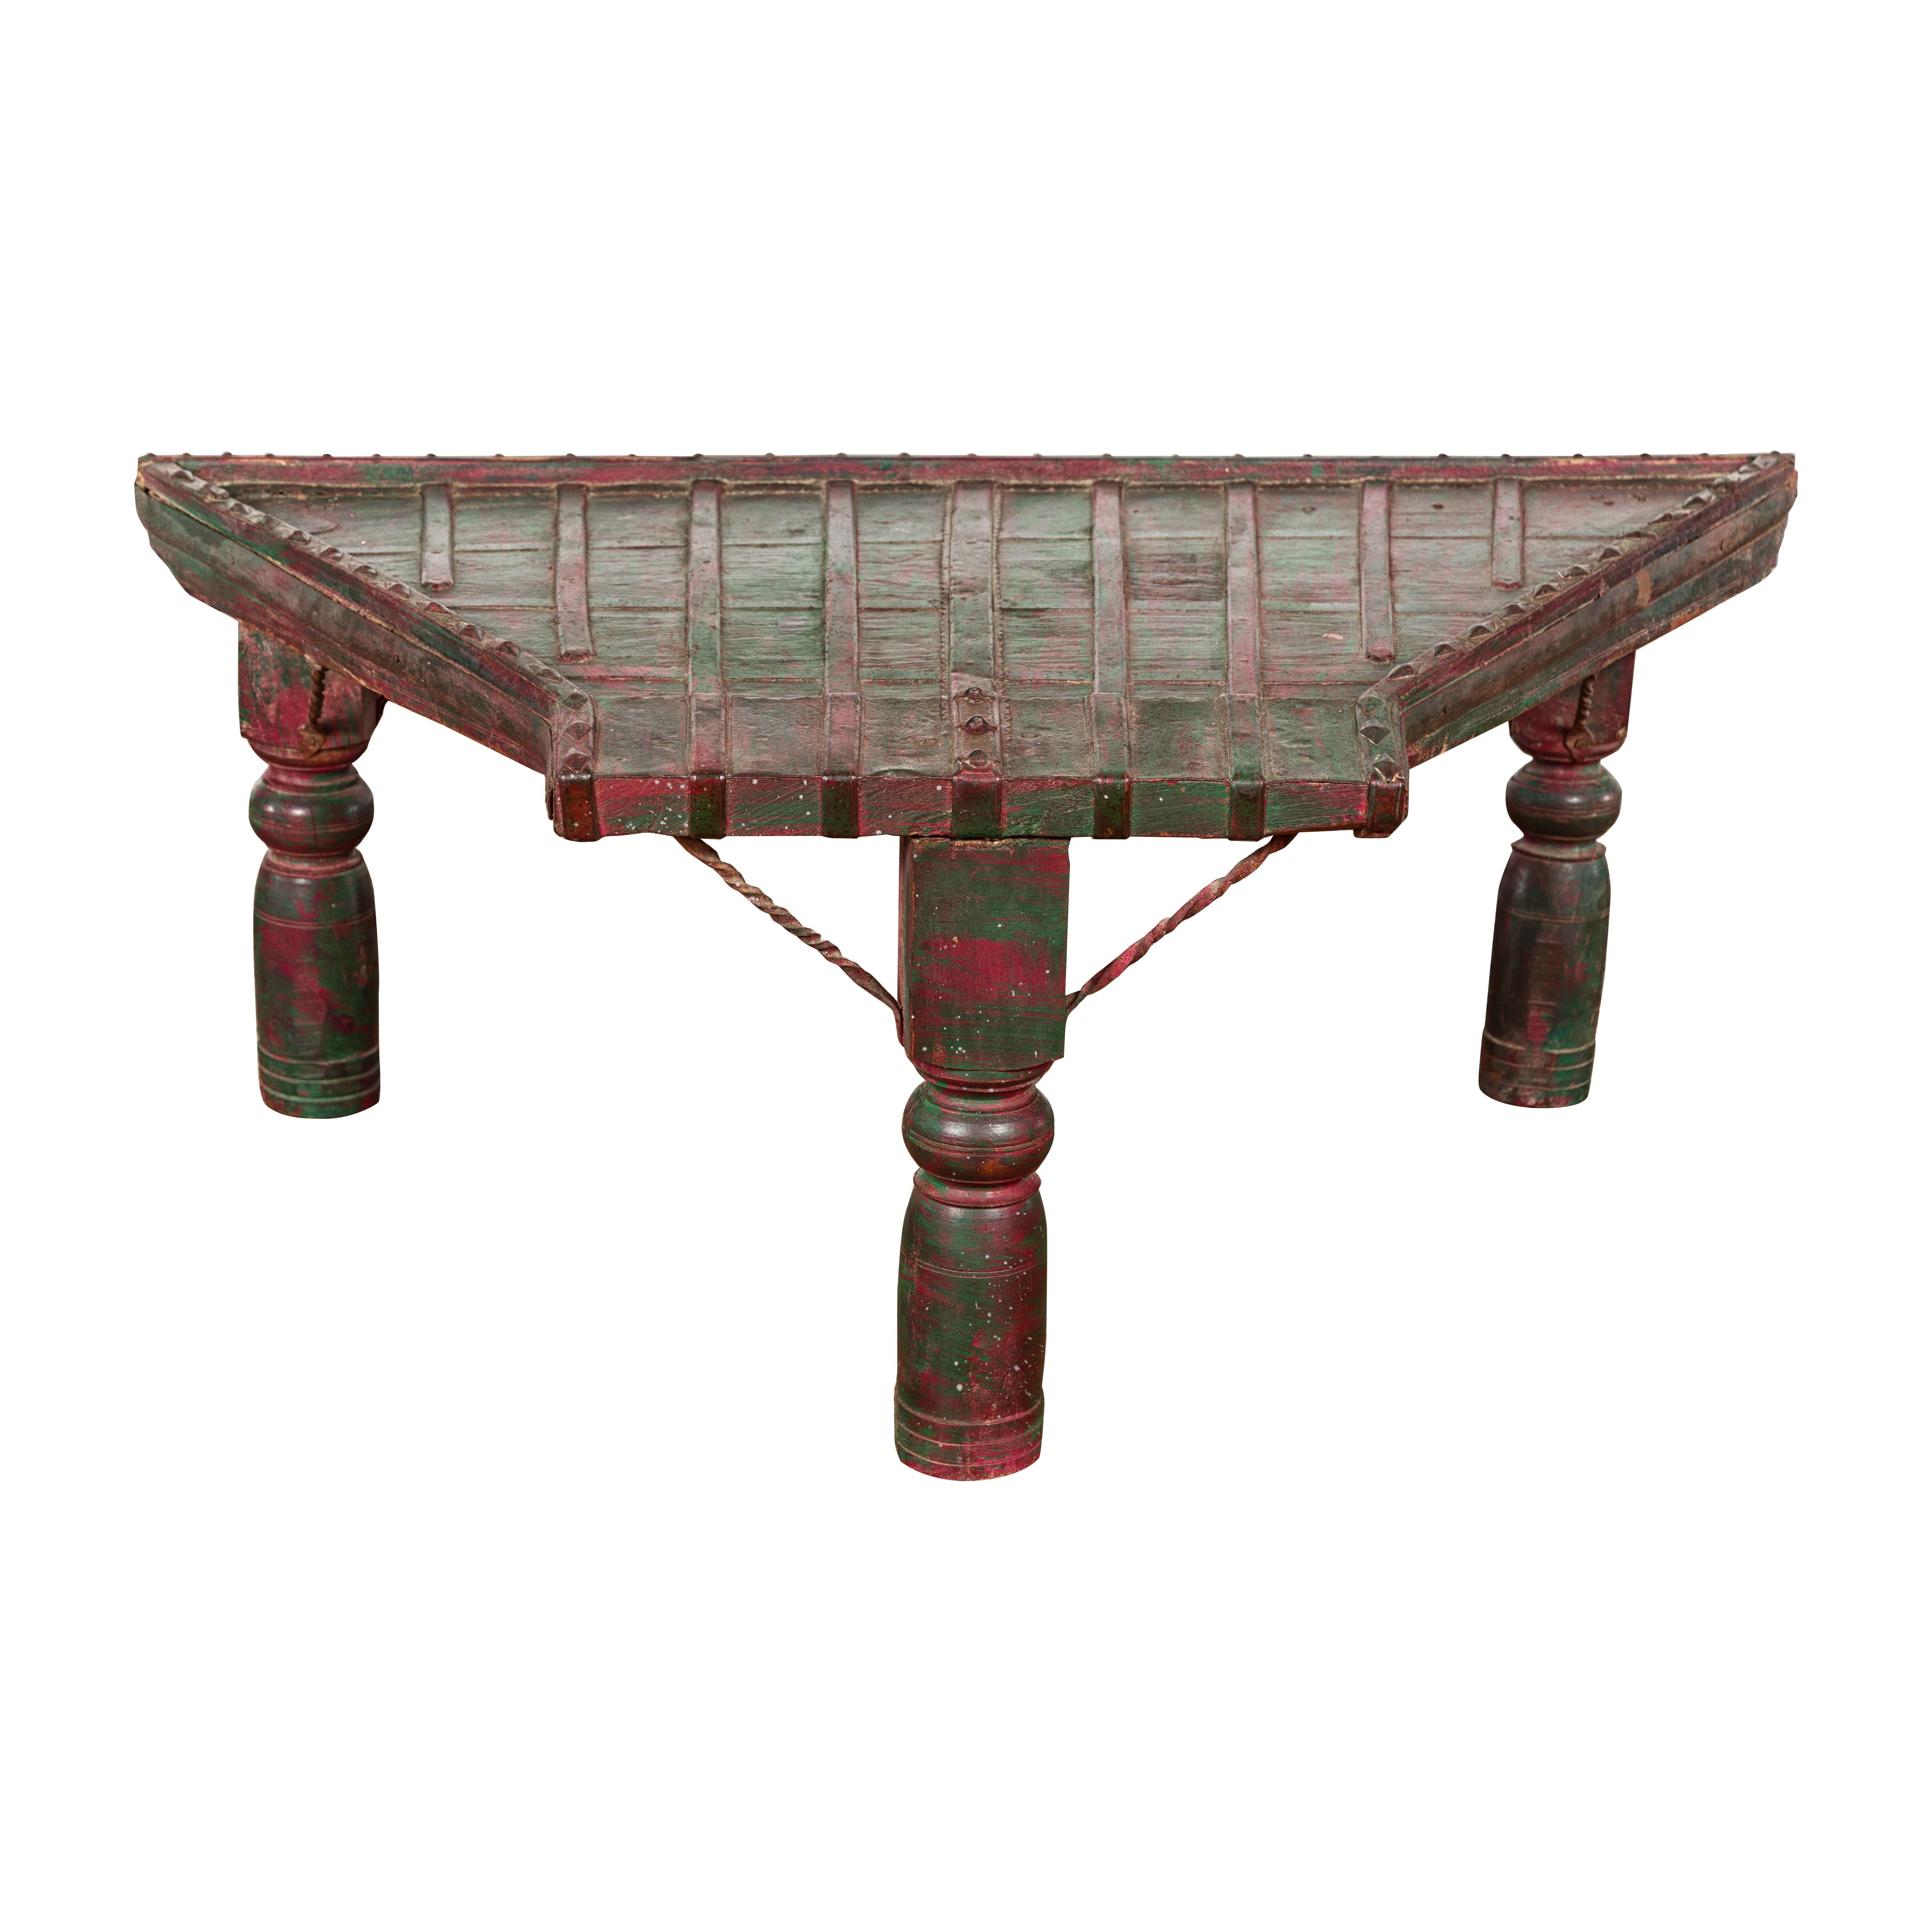 Rustic Coffee Table with Red and Green Lacquer, Turned Baluster Legs and Iron For Sale 12